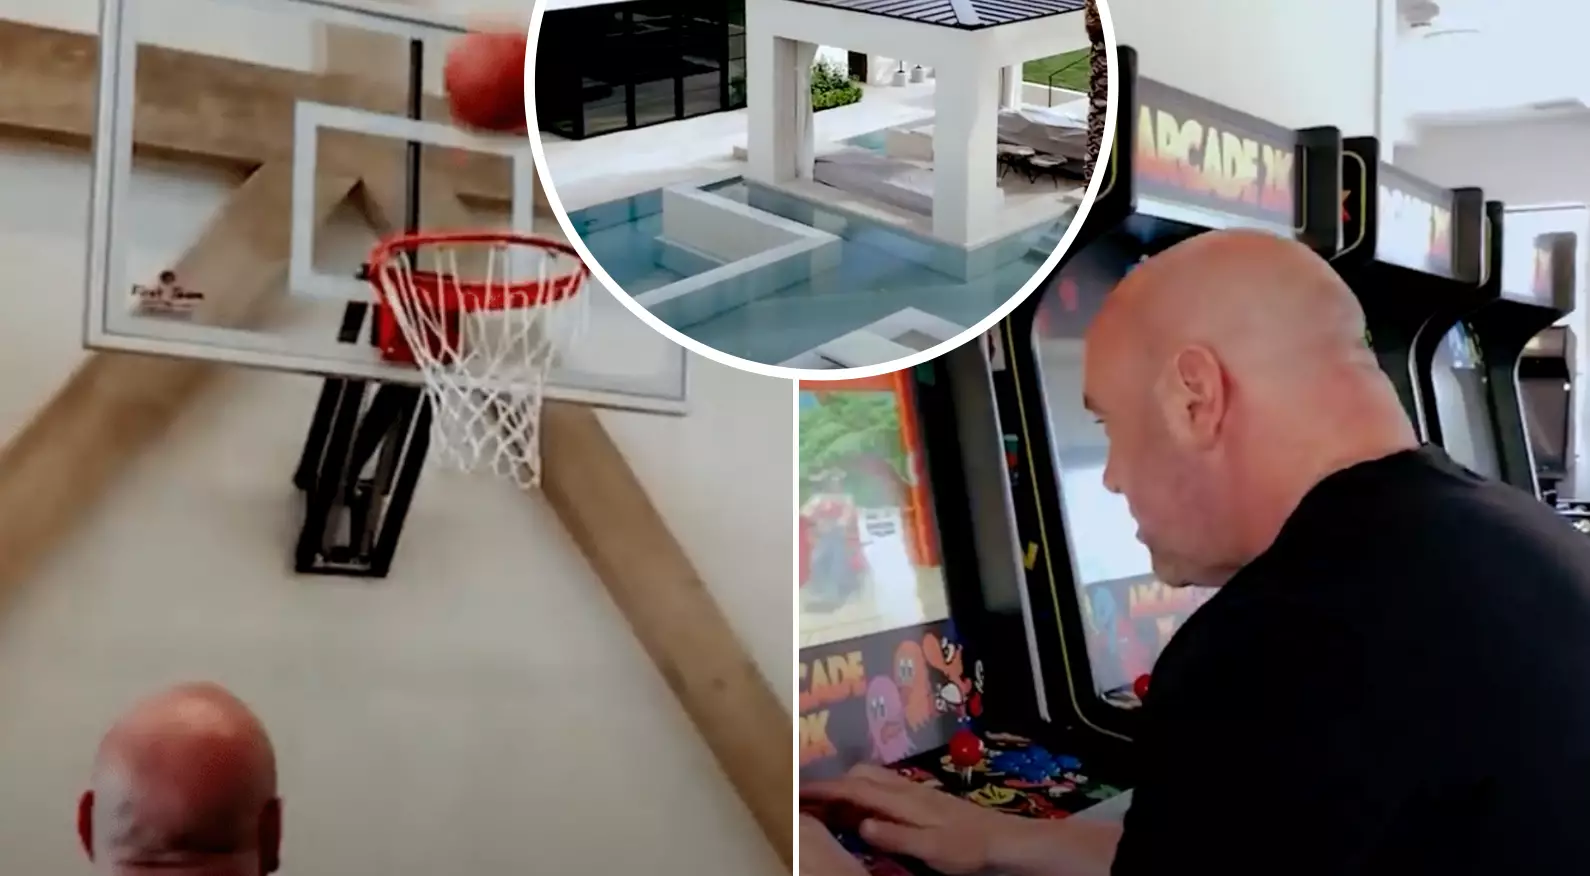 UFC President Dana White Gives Tour Of Mansion And Shows Off Basketball Court And Swimming Pool